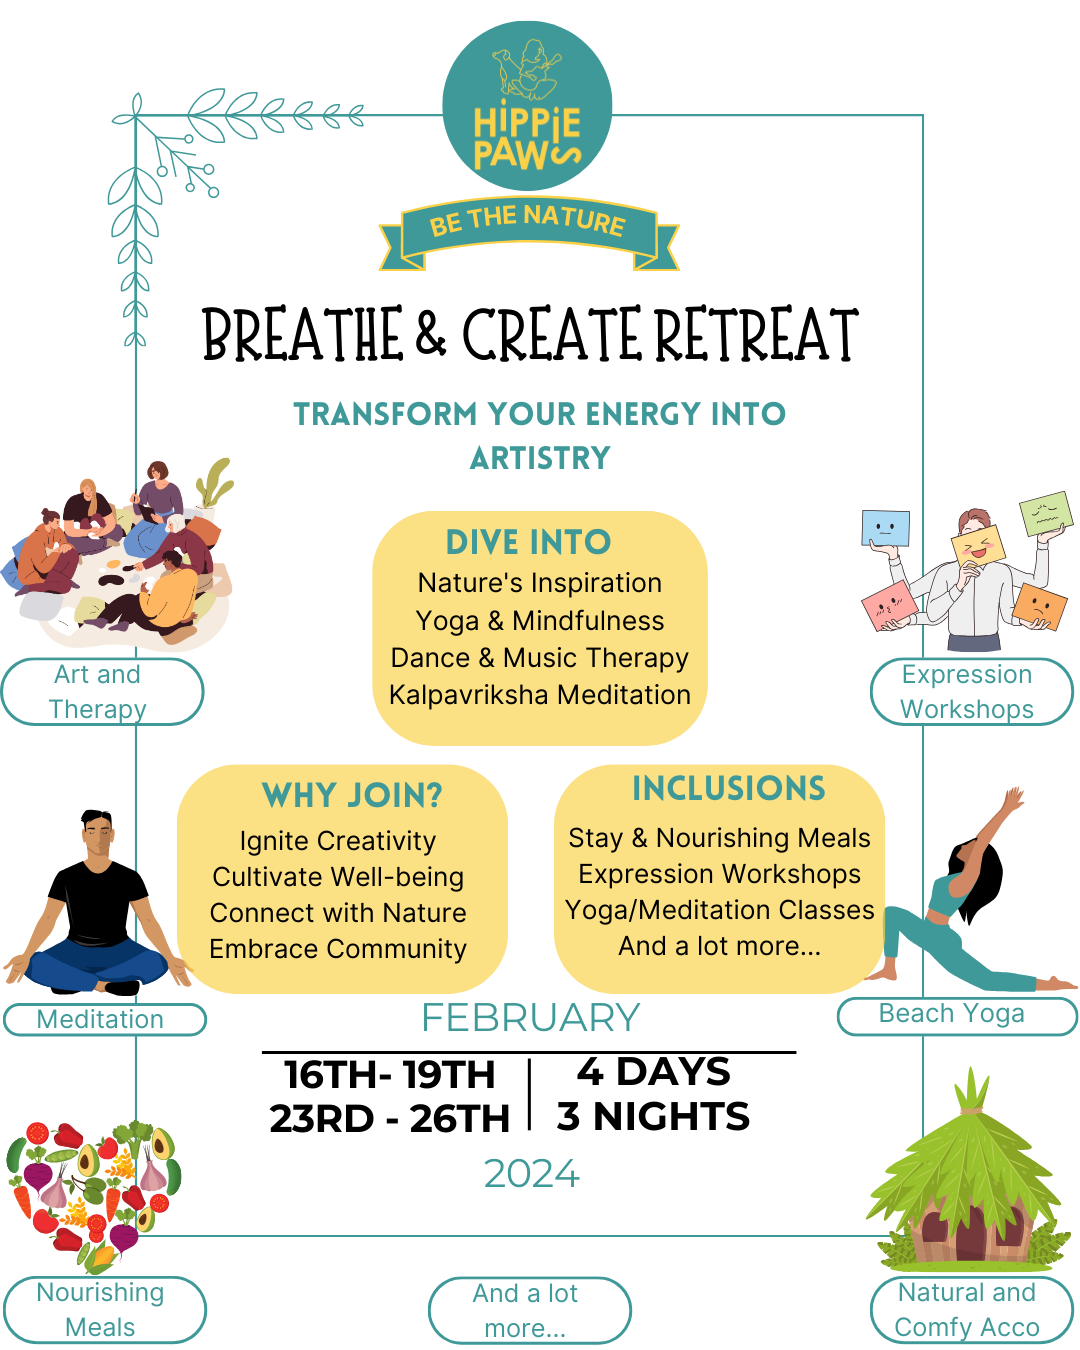 Breathe and Create Retreat at Hippie Paws Wellness Resort